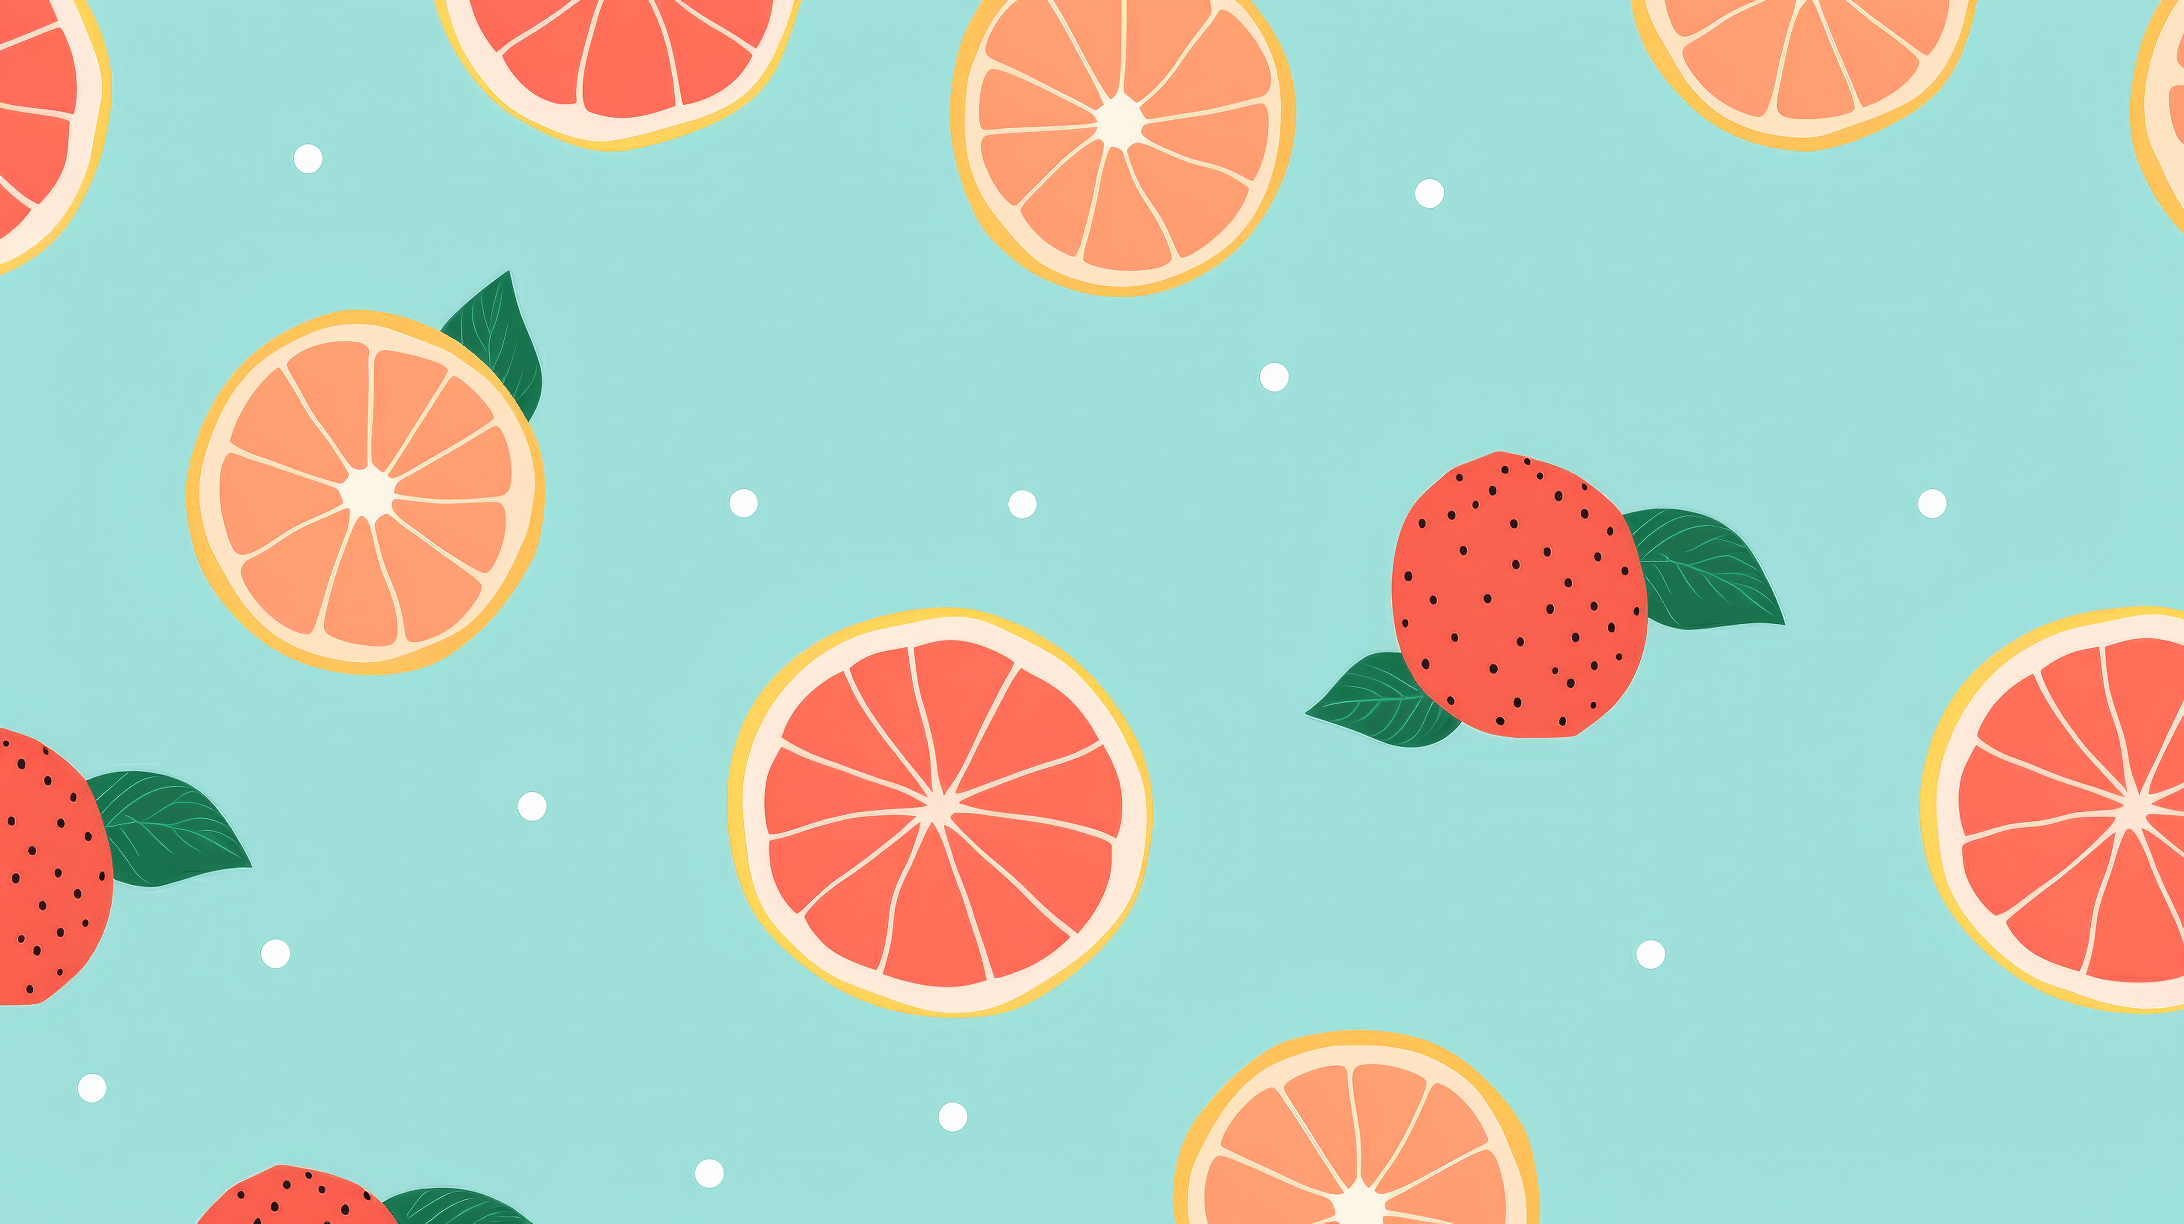 A pattern of grapefruits on a blue background - Fruit